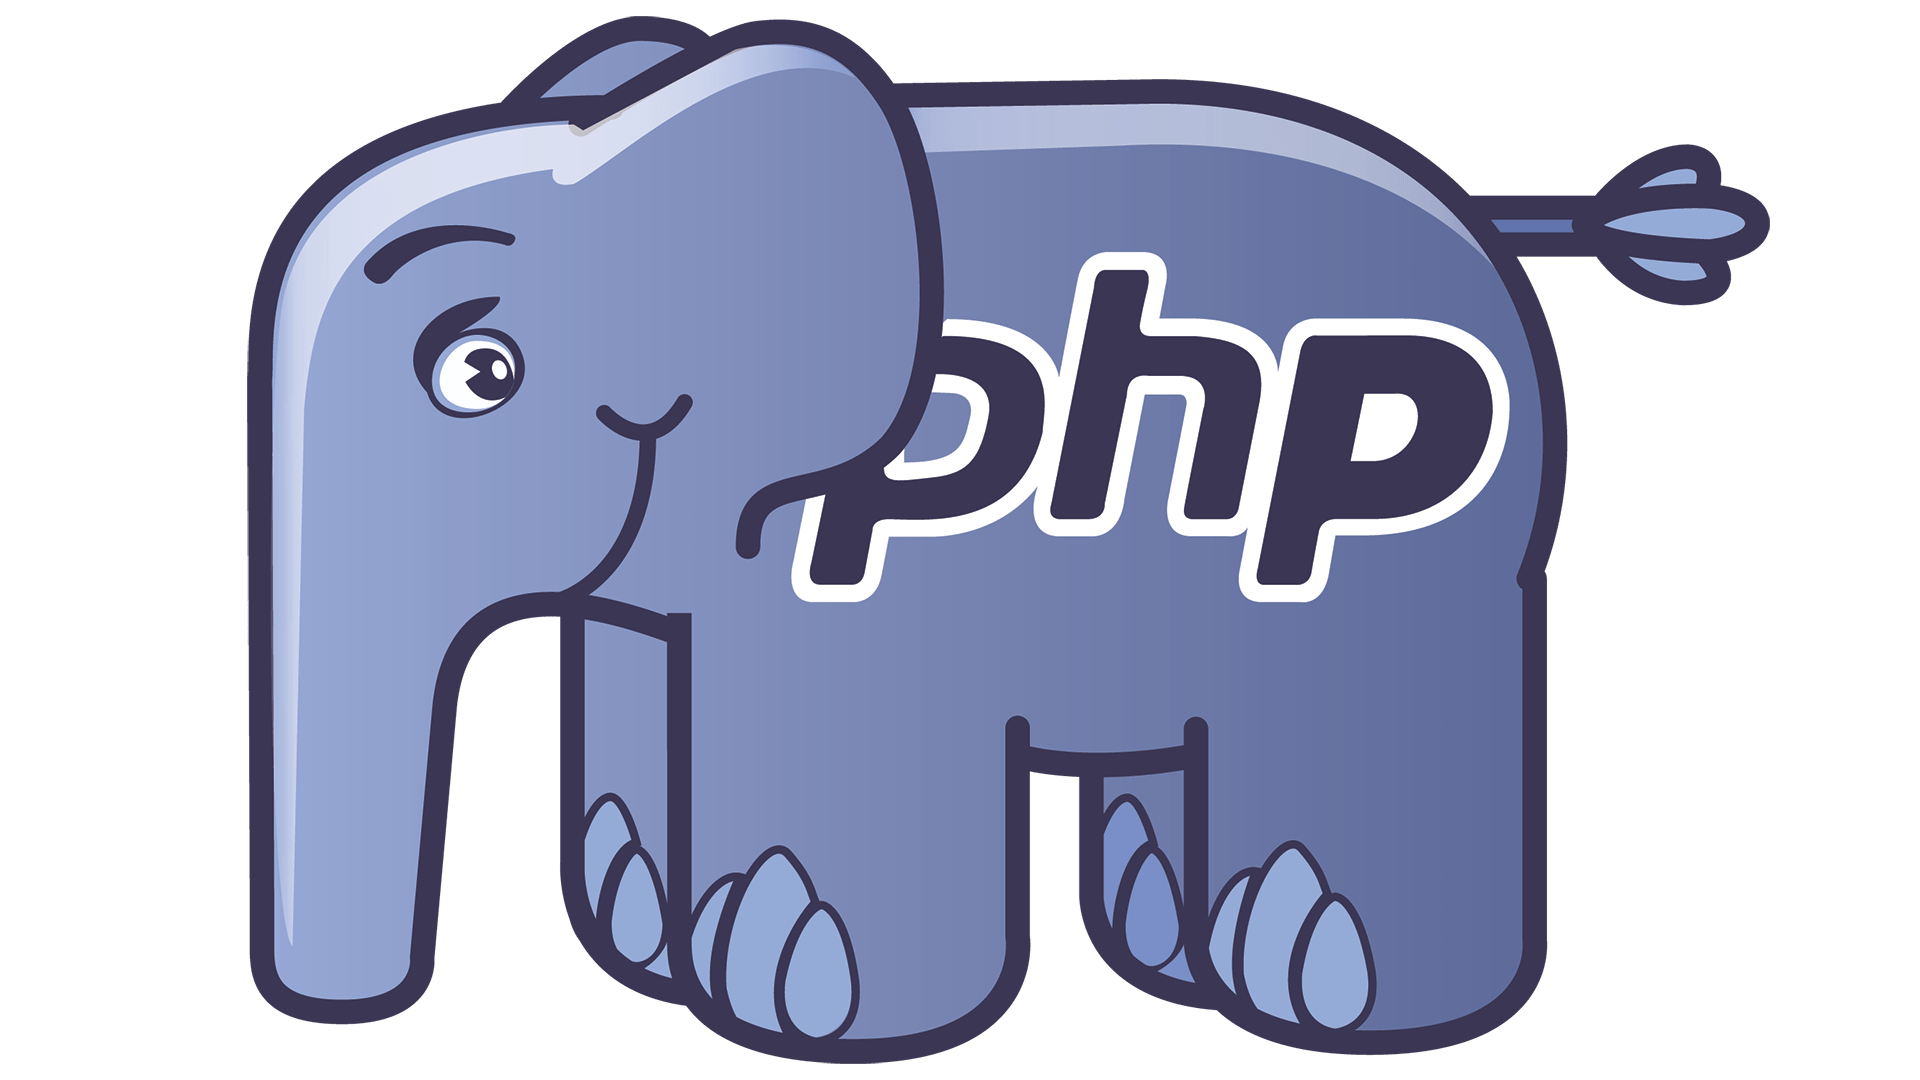 Php. Php картинка. Php logo. Php слон. Php 7.0